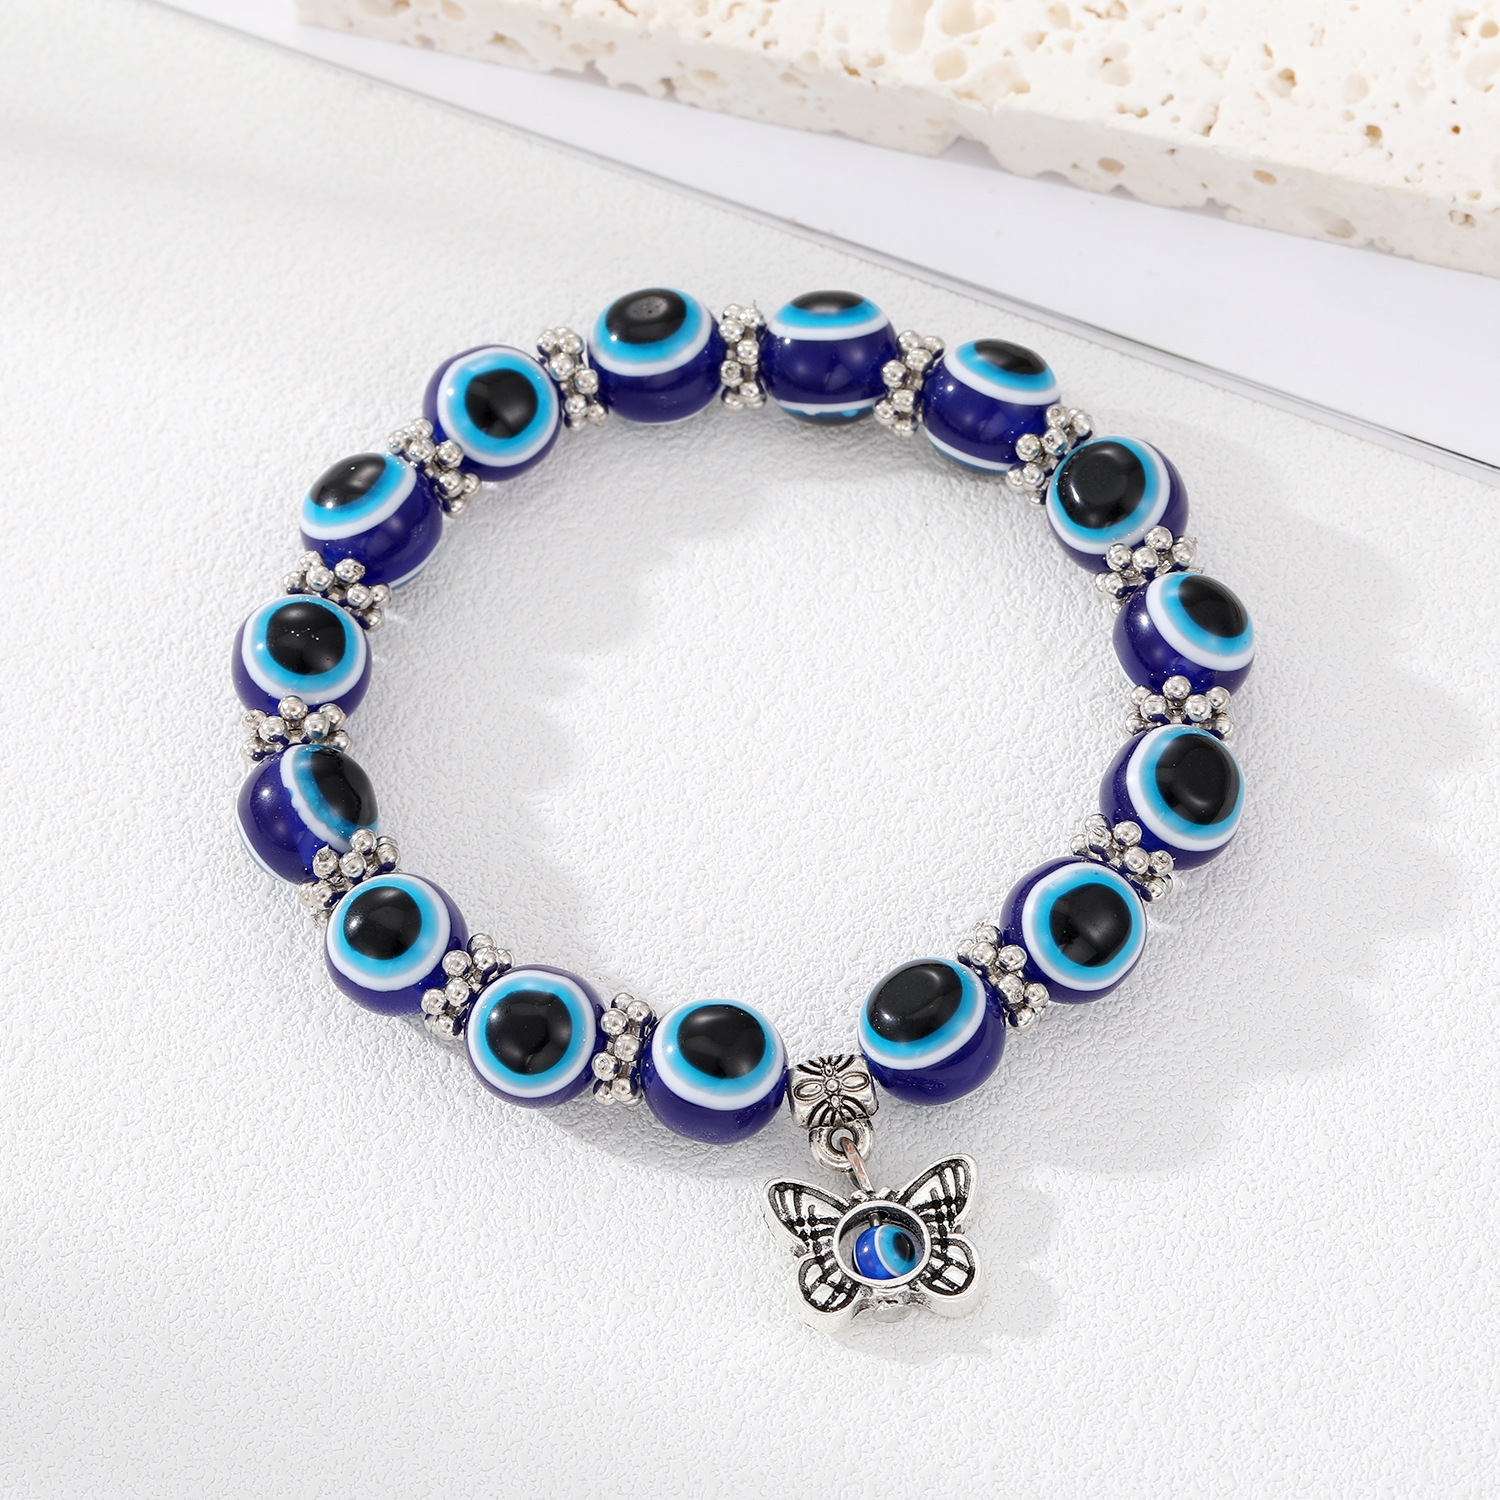 Blue butterfly bracelet with large beads